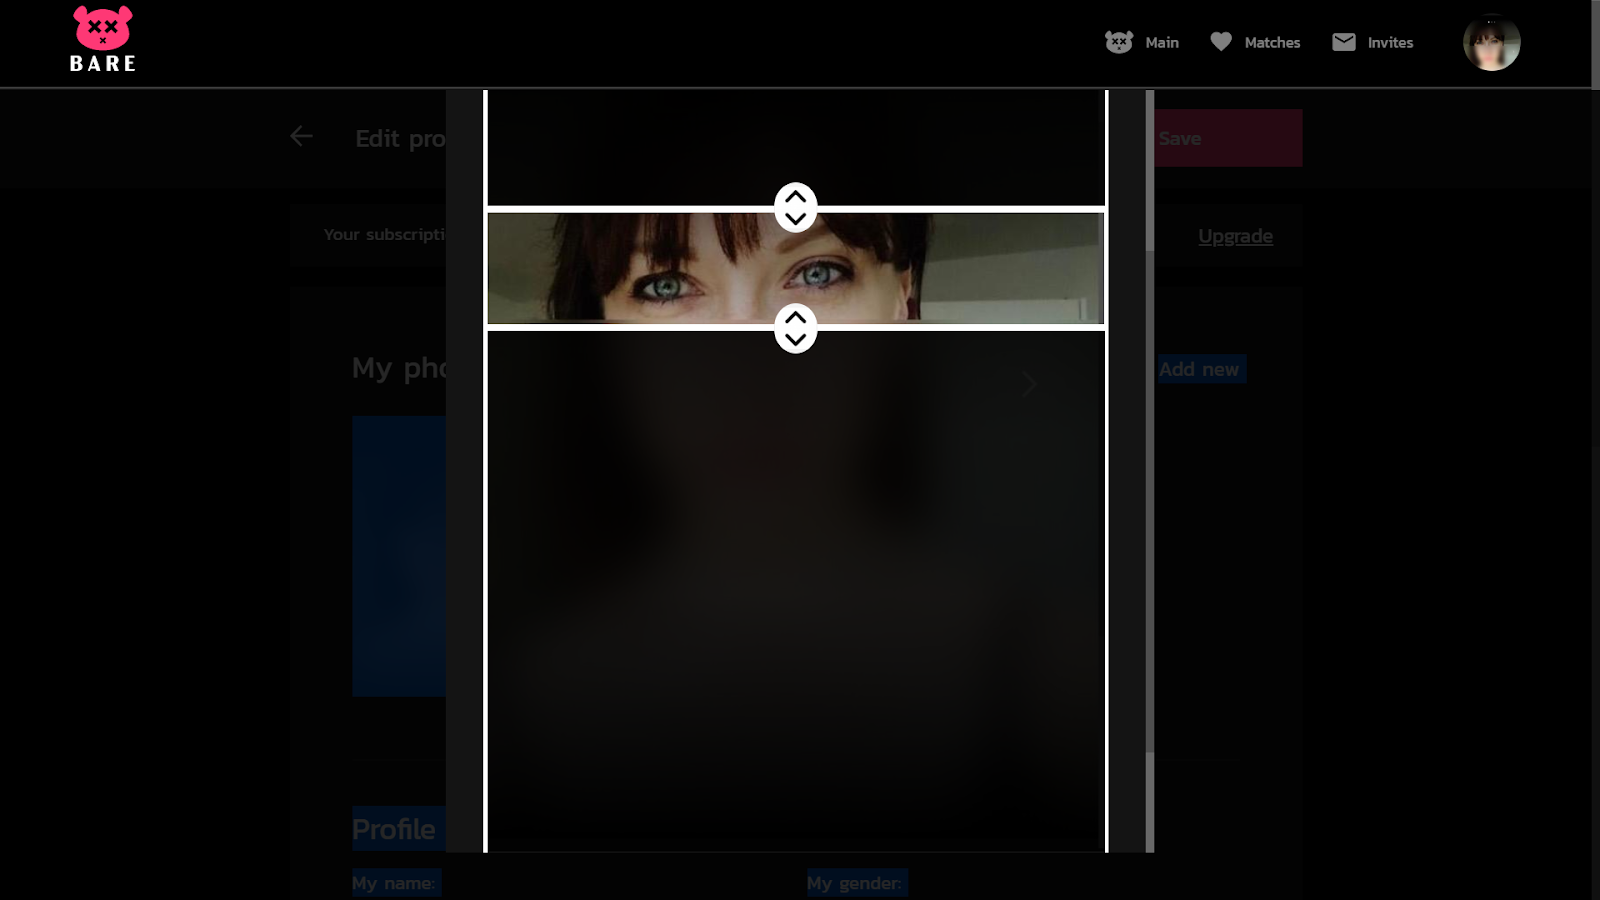 Desktop interface of dating app site. Cropped photograph of woman's eyes.